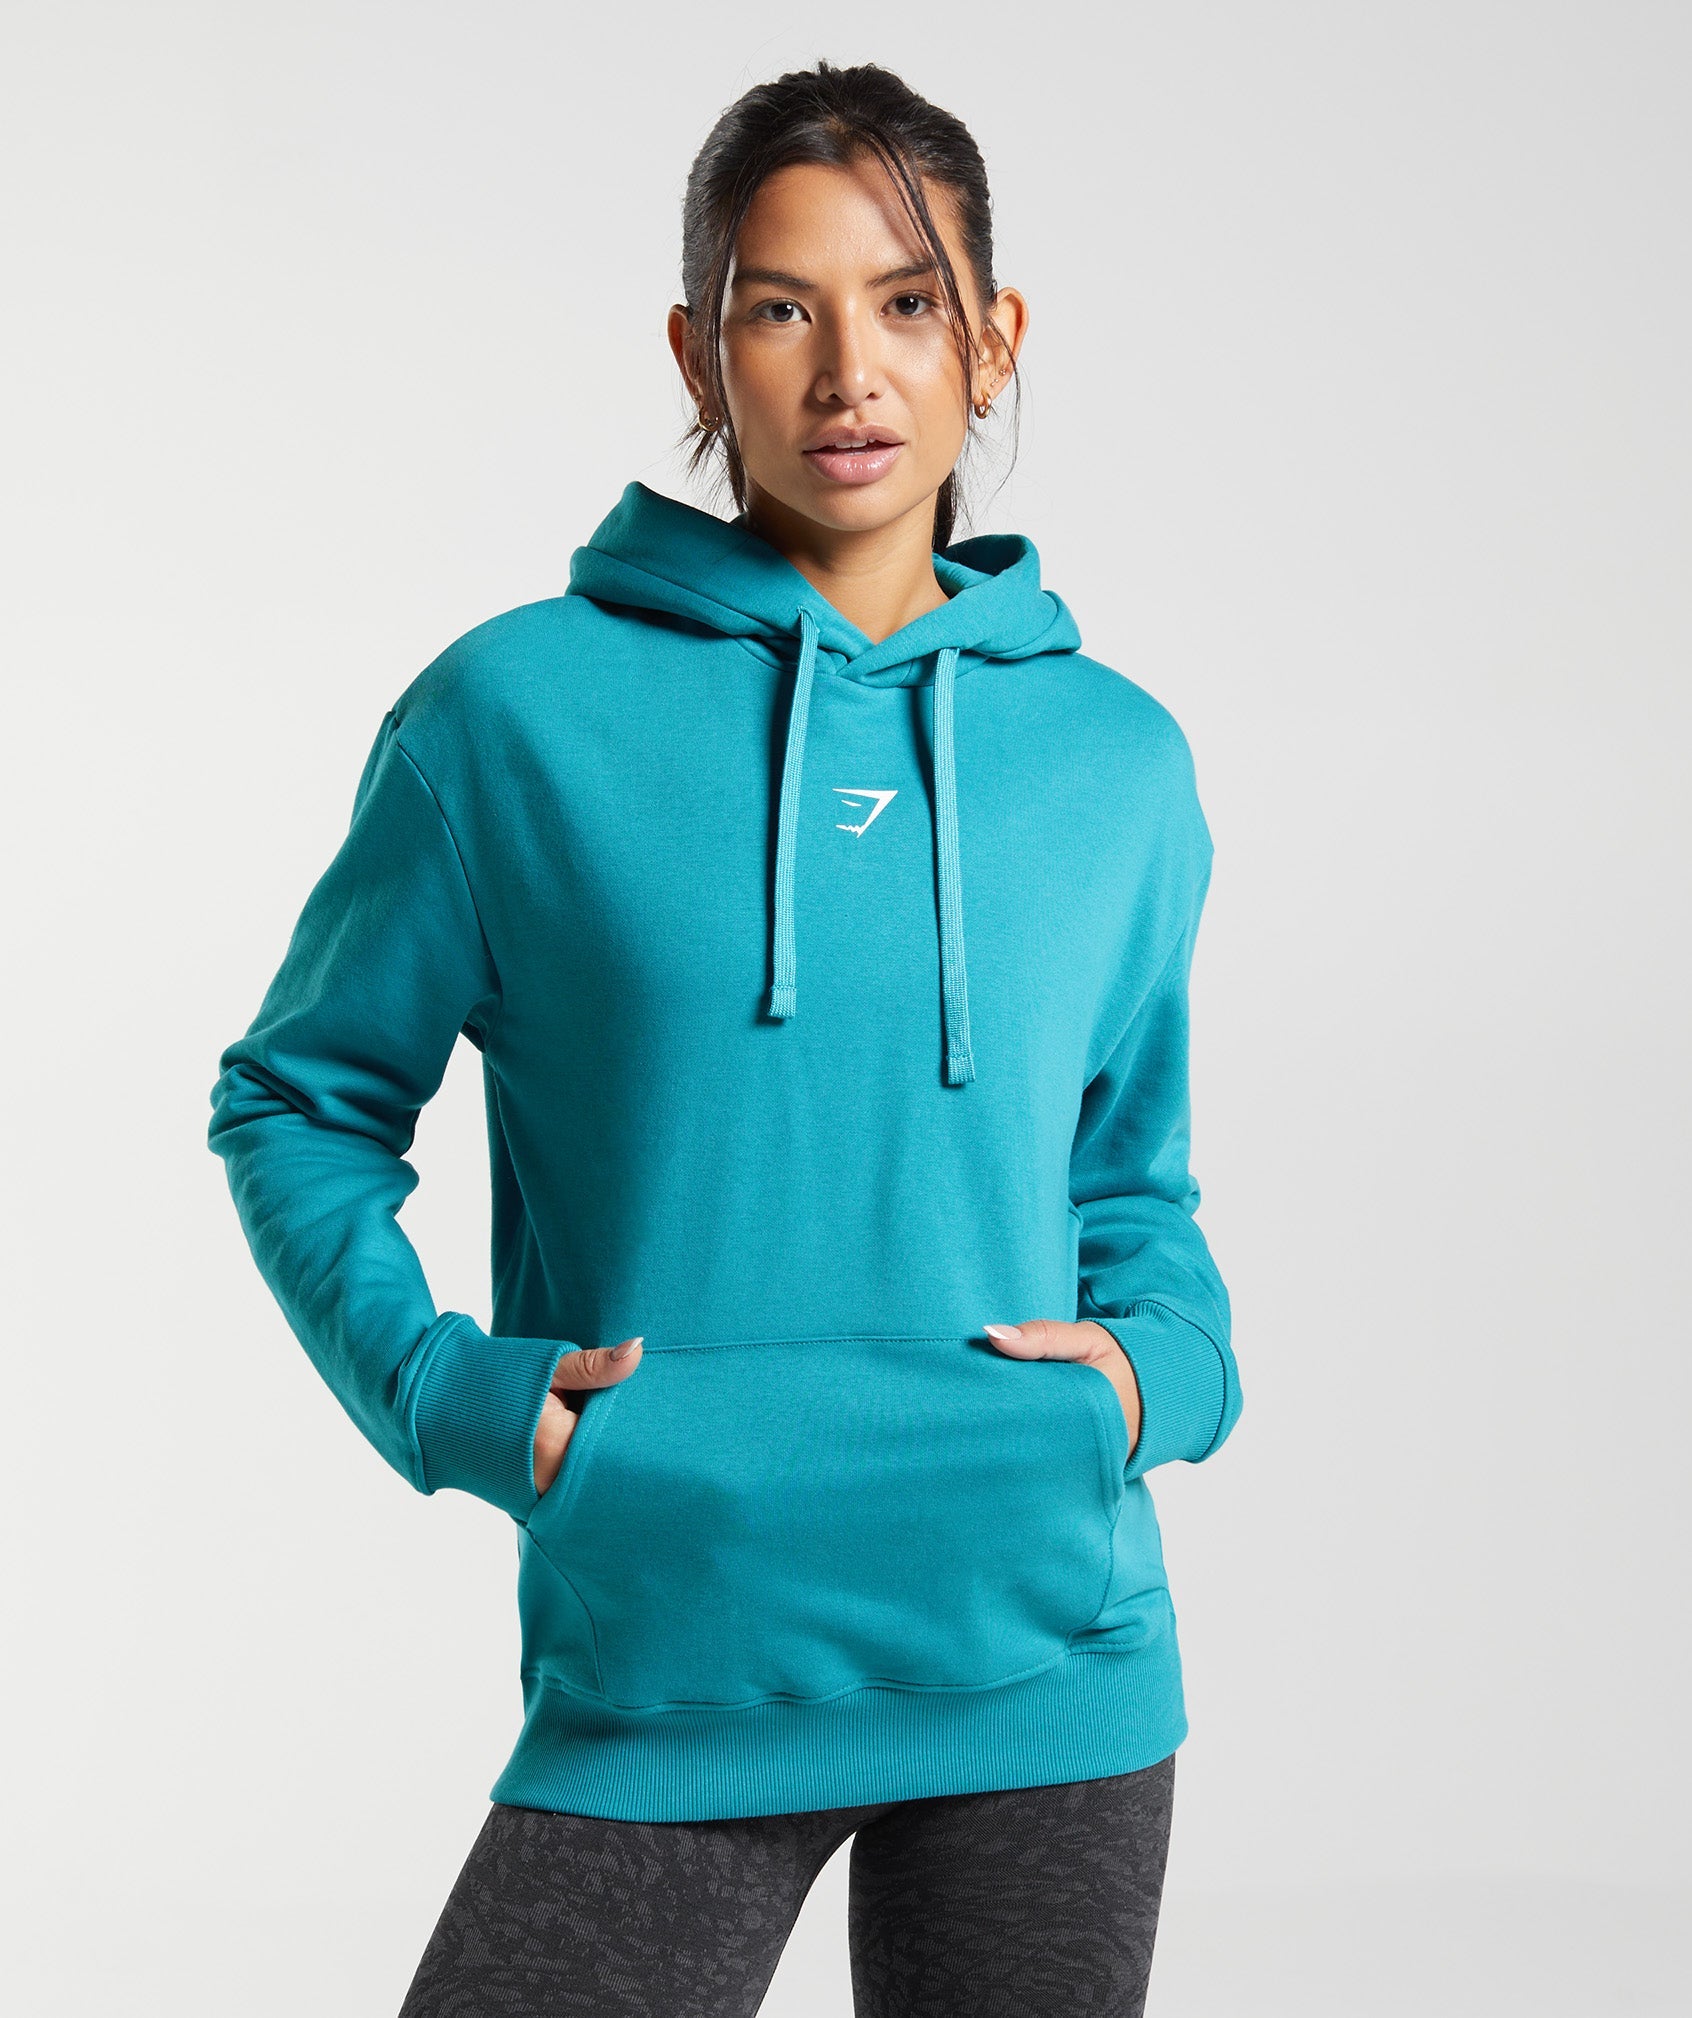 Leah Women's Workout Hoodie Modest Activewear Yoga Clothing Breathable Gym  Tops (as1, alpha, s, regular, regular, Blue) at  Women's Clothing  store